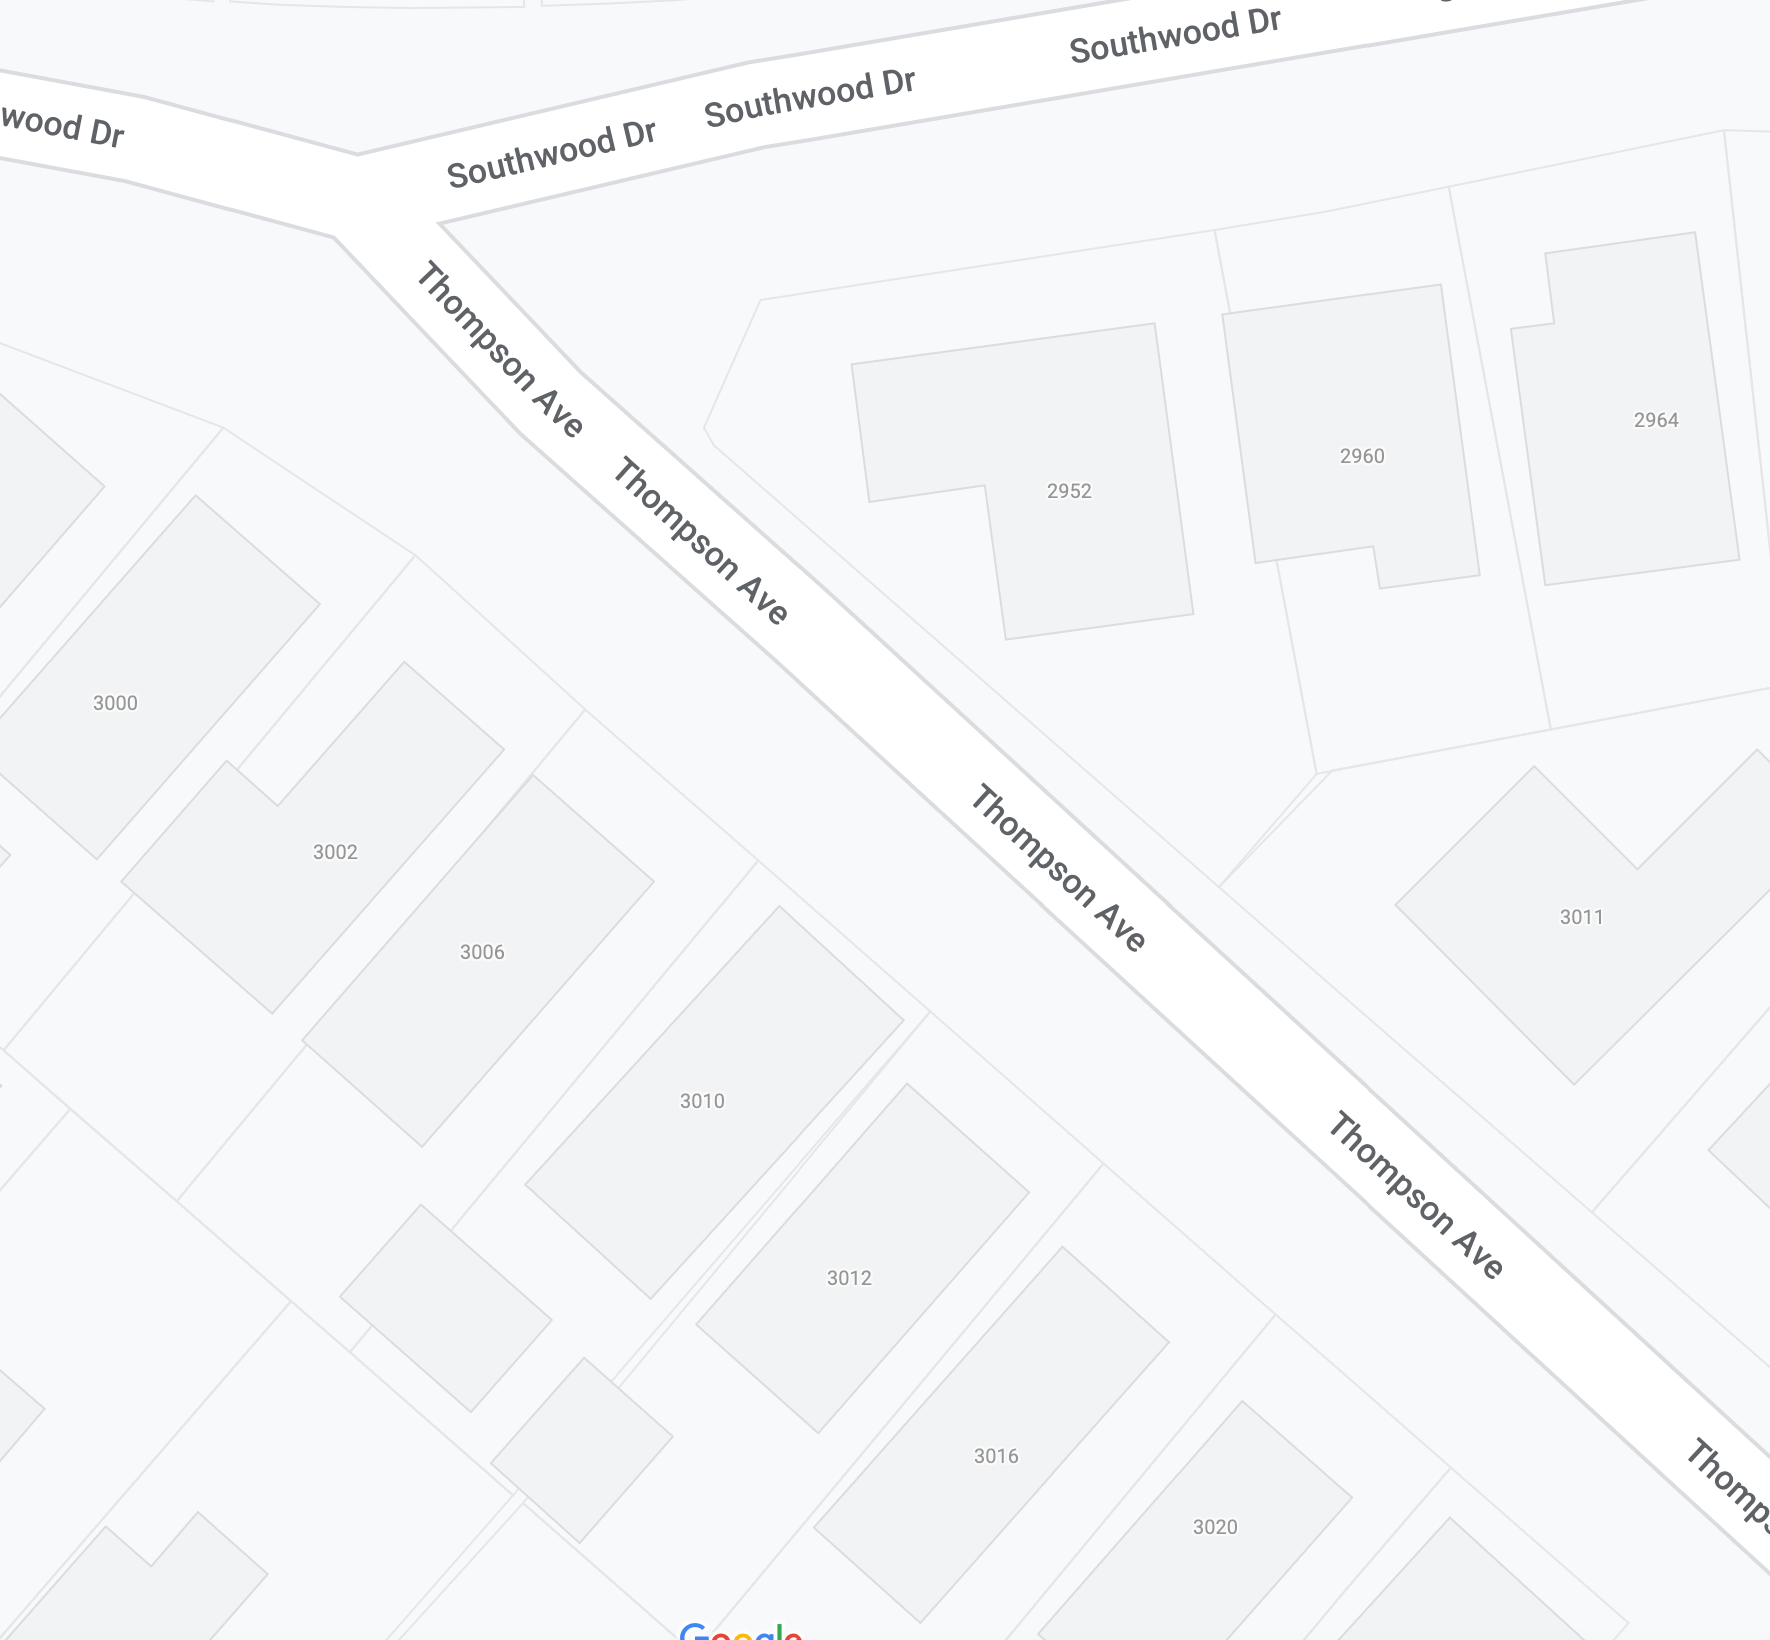 Google Maps image of Thompson Avenue showing the building numbers stop at 3000